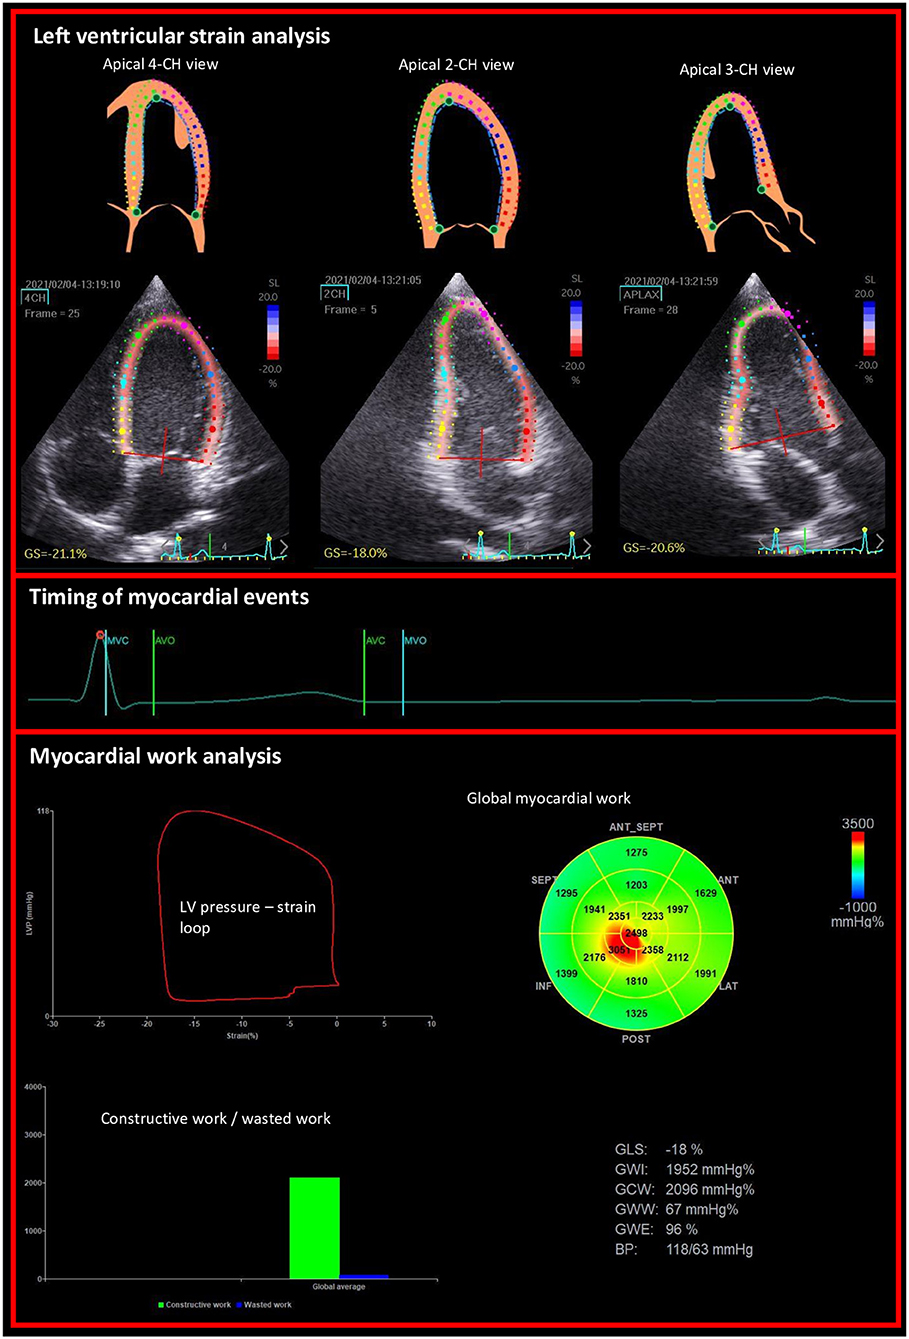 JACC Journals - Journals of the American College of Cardiology - Editors'  Insights: Global longitudinal strain on echo is complementary to left  ventricular ejection fraction, with additive value in many cardiovascular  diseases